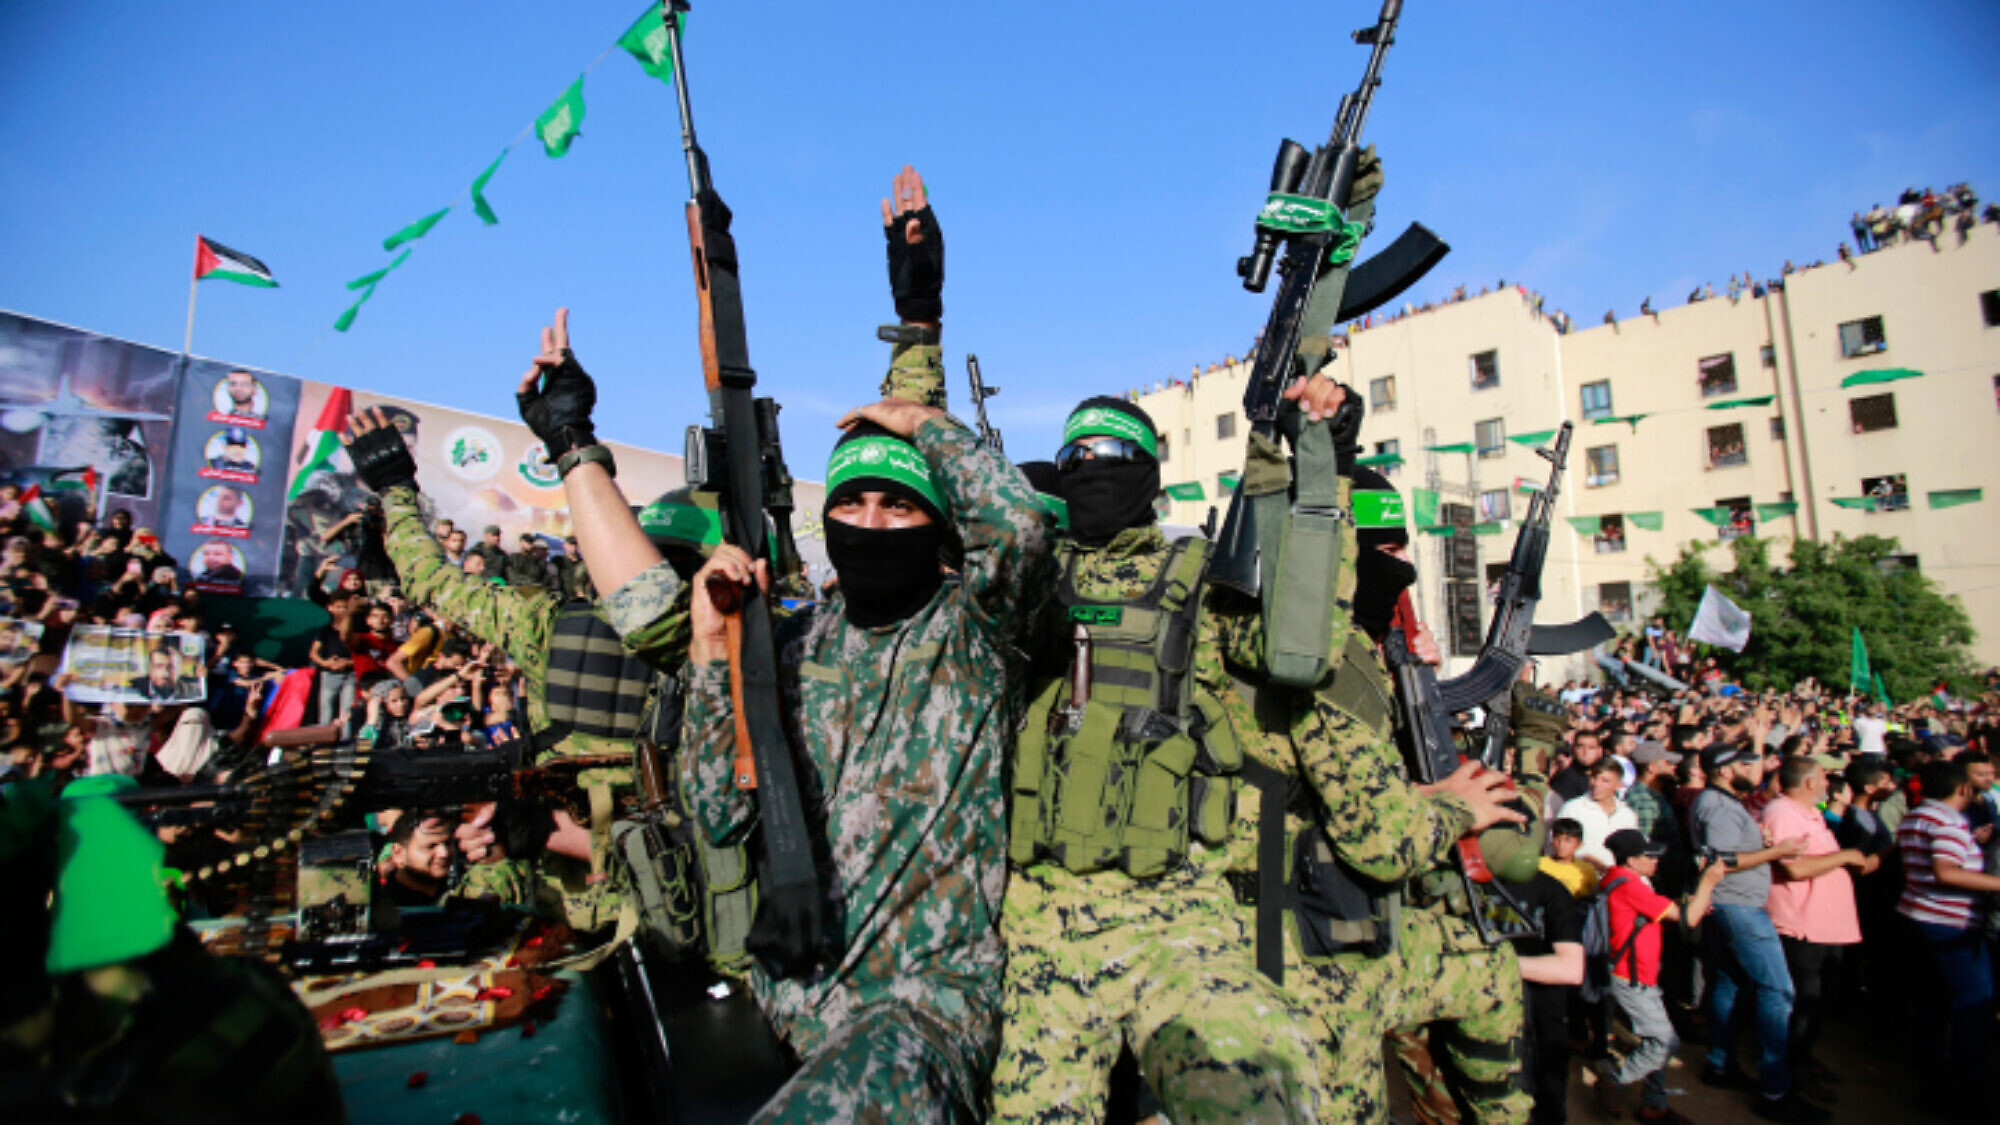 Hamas members attend a rally in Beit Lahiya on May 30, 2021. Photo by Atia Mohammed/Flash90.